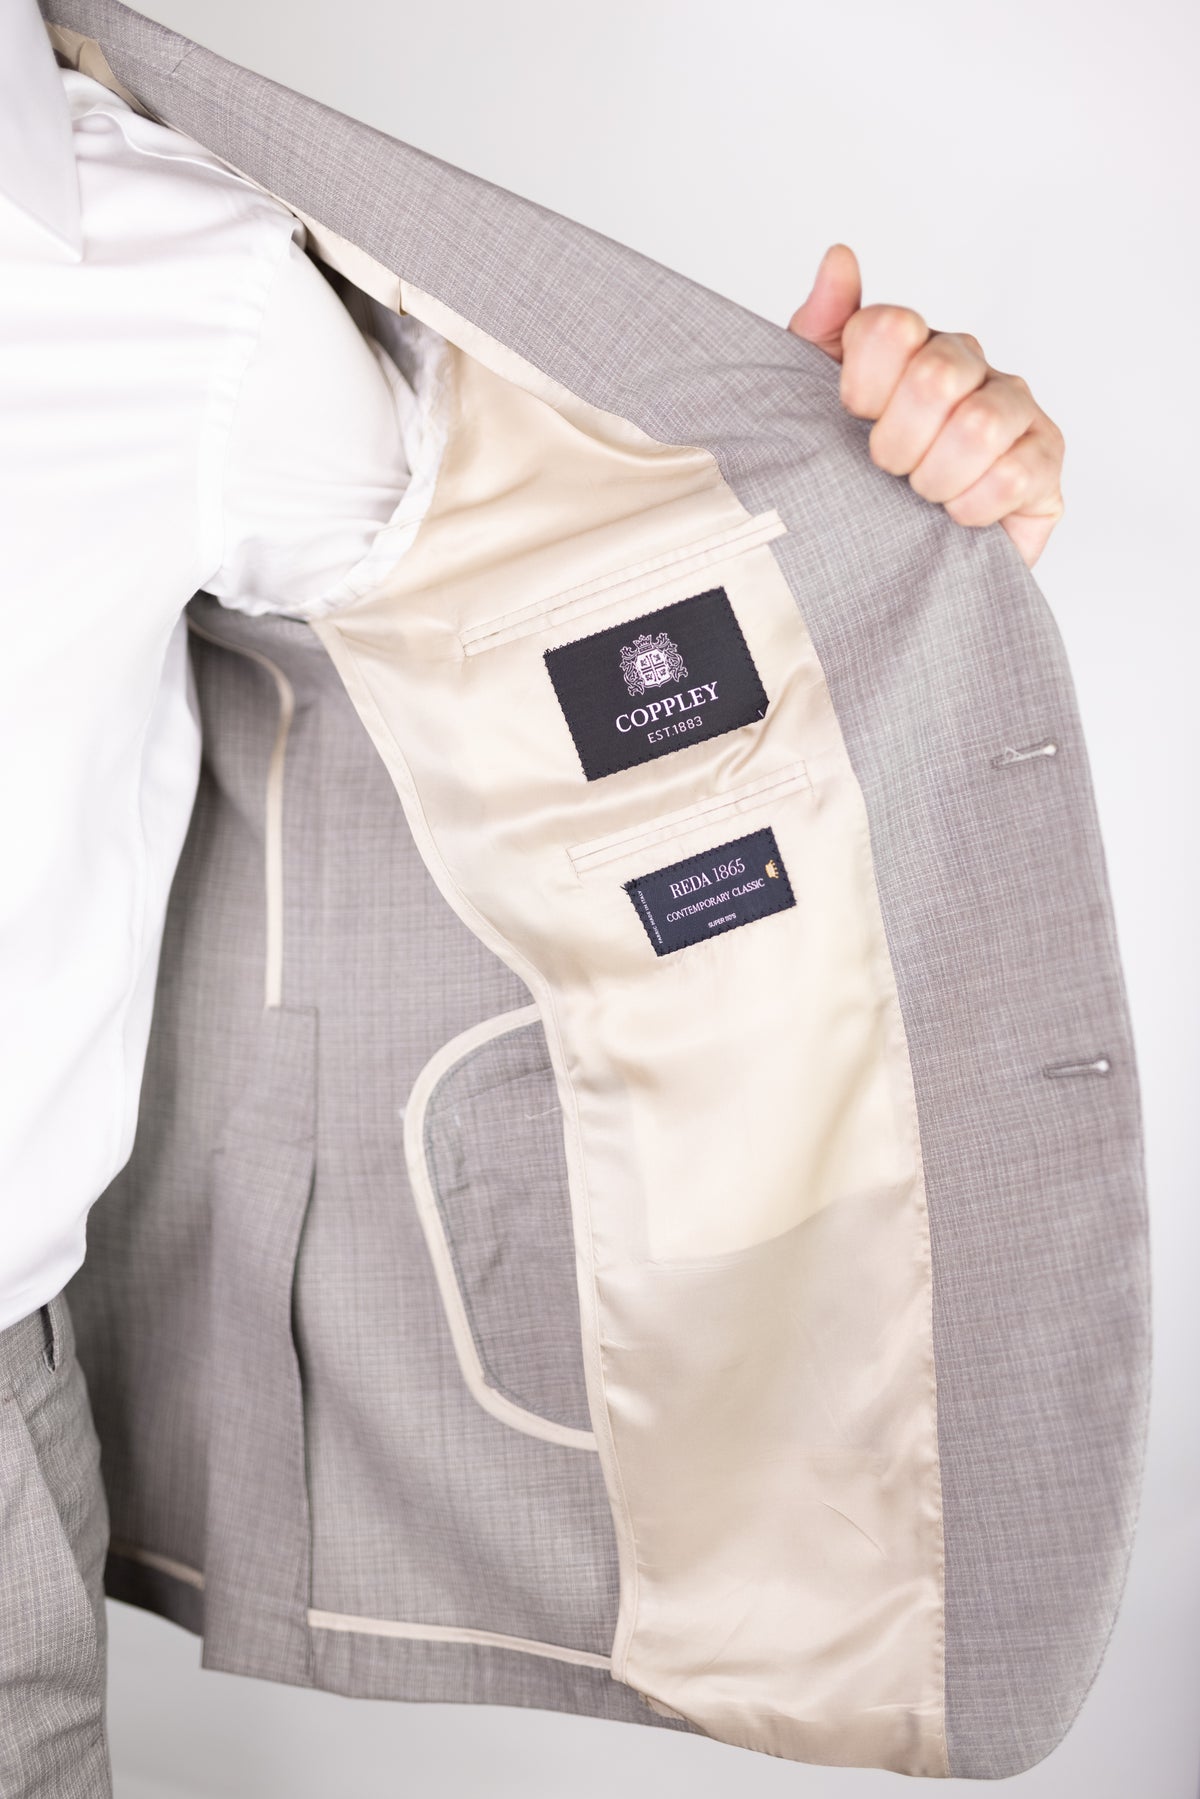 Coppley Contemporary Classic Suit